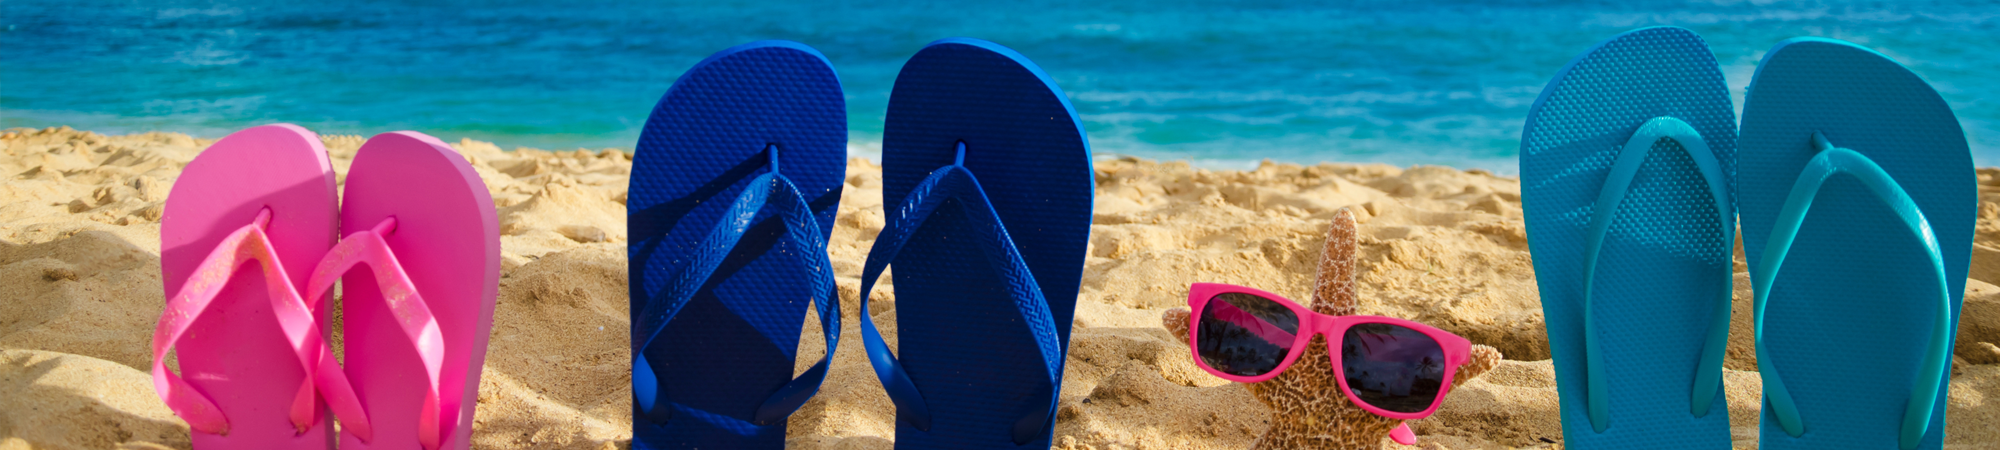 Picture showing flip-flops on a beach